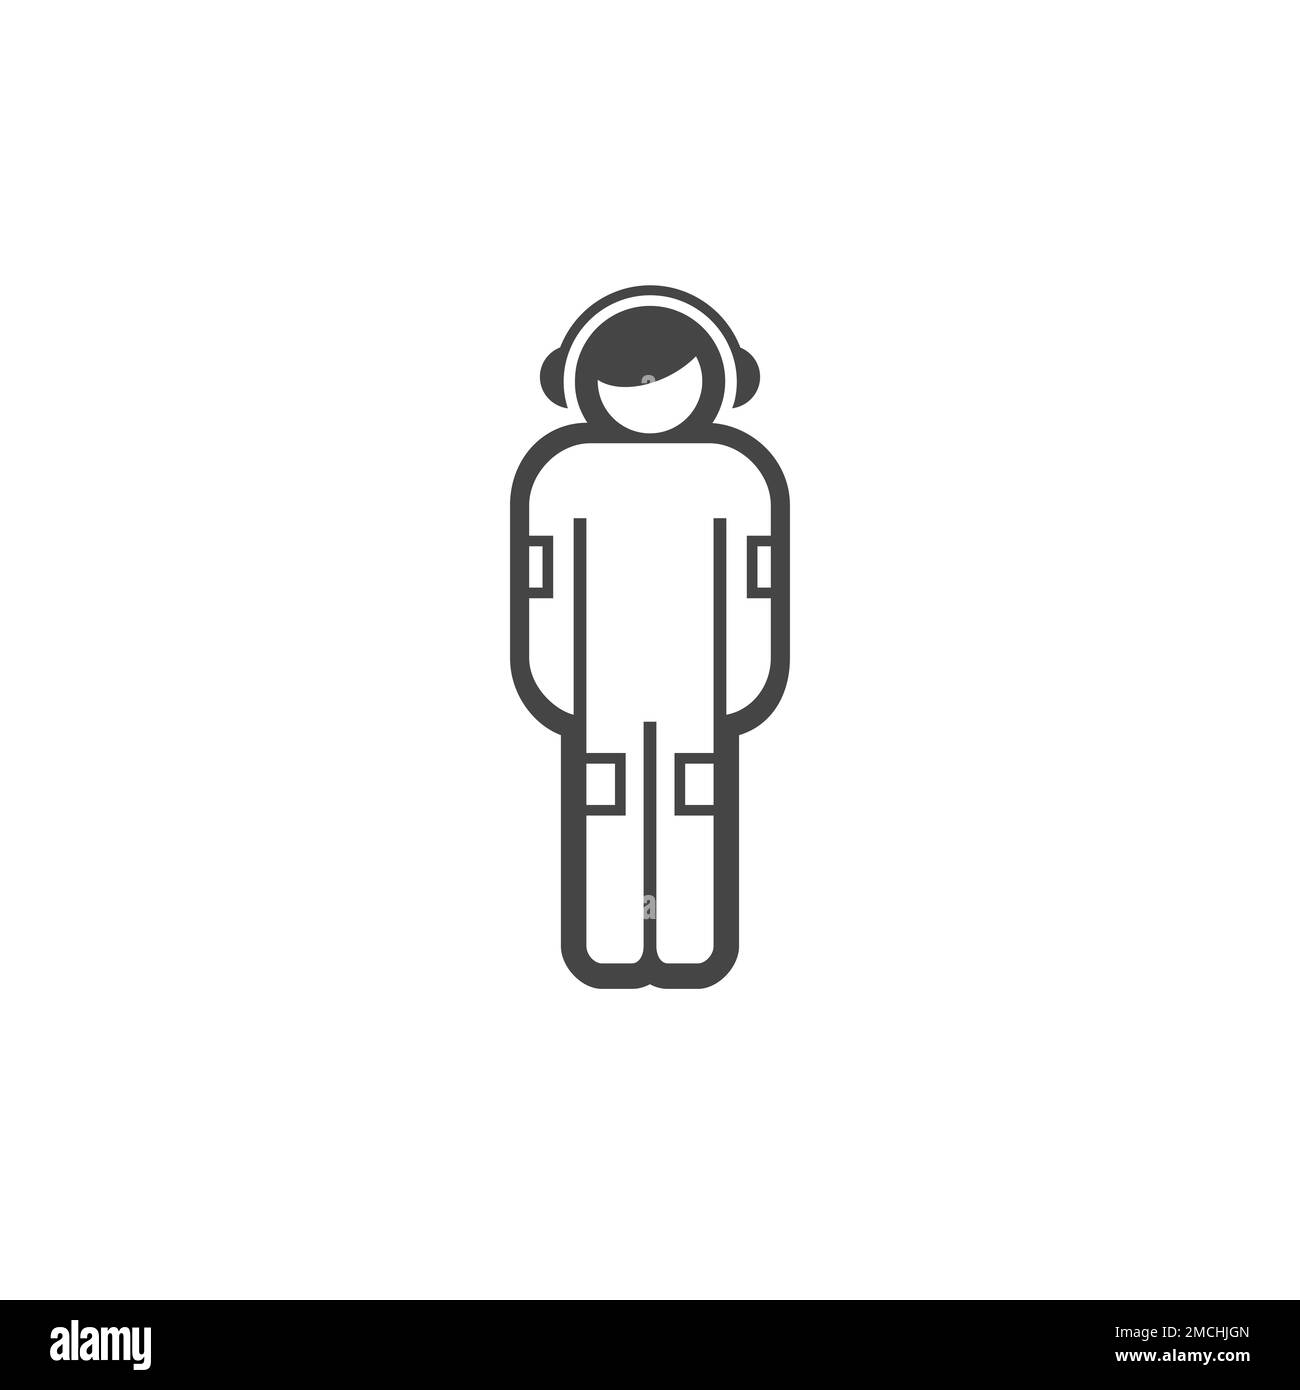 Teenager in headphones icon. Teen infographics pictogram. Flat illustration isolated on white background. Stock Photo